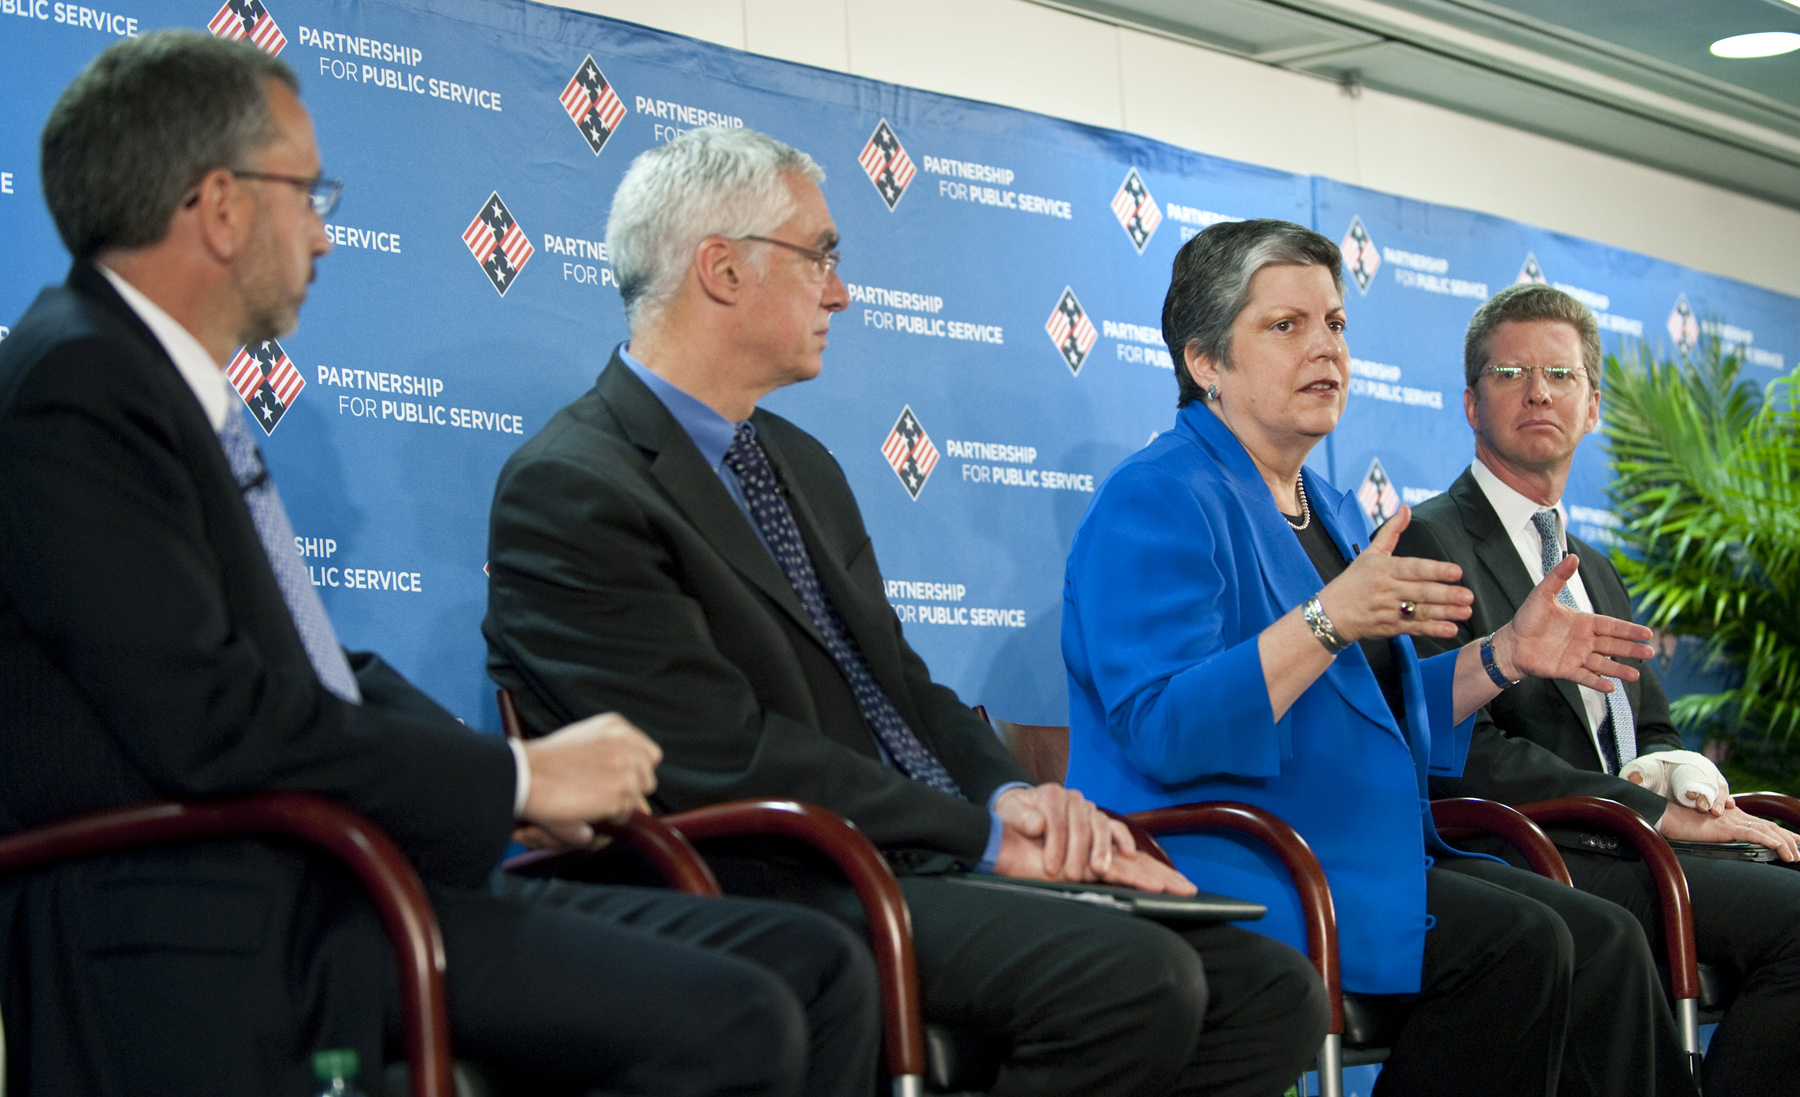 Secretary Napolitano joined other senior Administration officials at the Partnership for Public Service Town Hall.